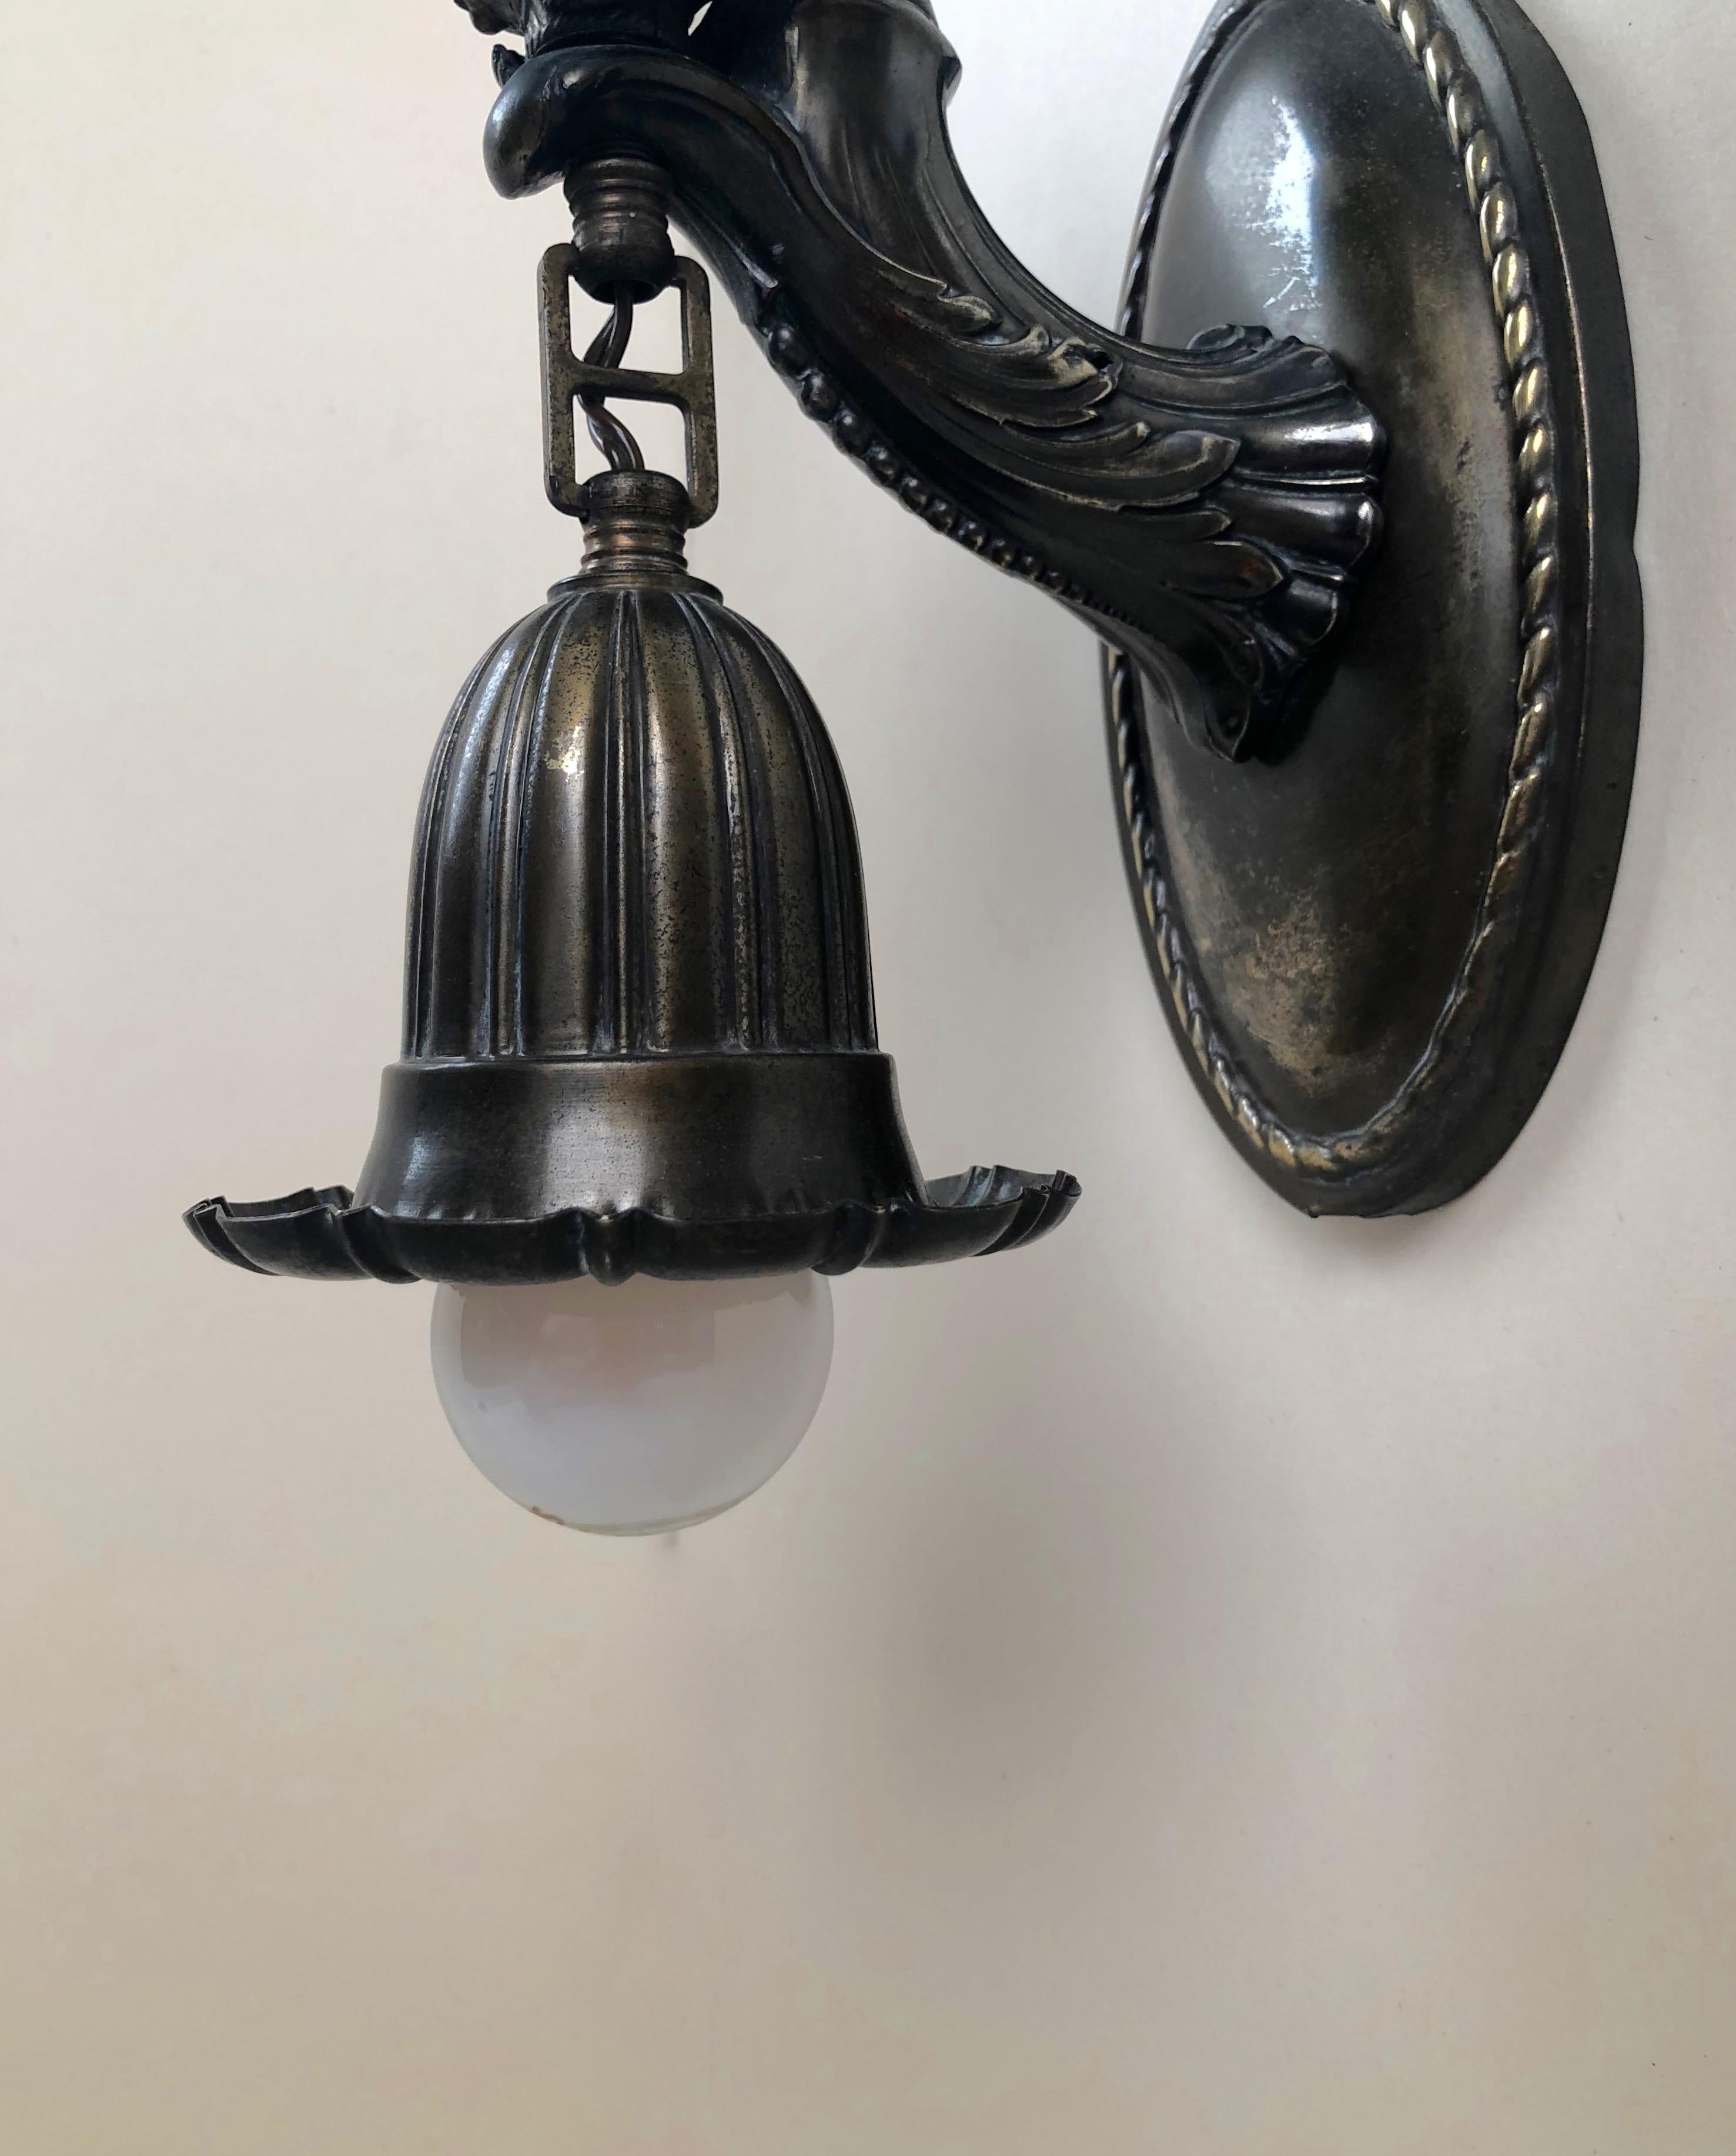 Early 20th Century Austrian Jugendstil Bronze Wall Sconce with a Torso of a Women Holding a Bouquet